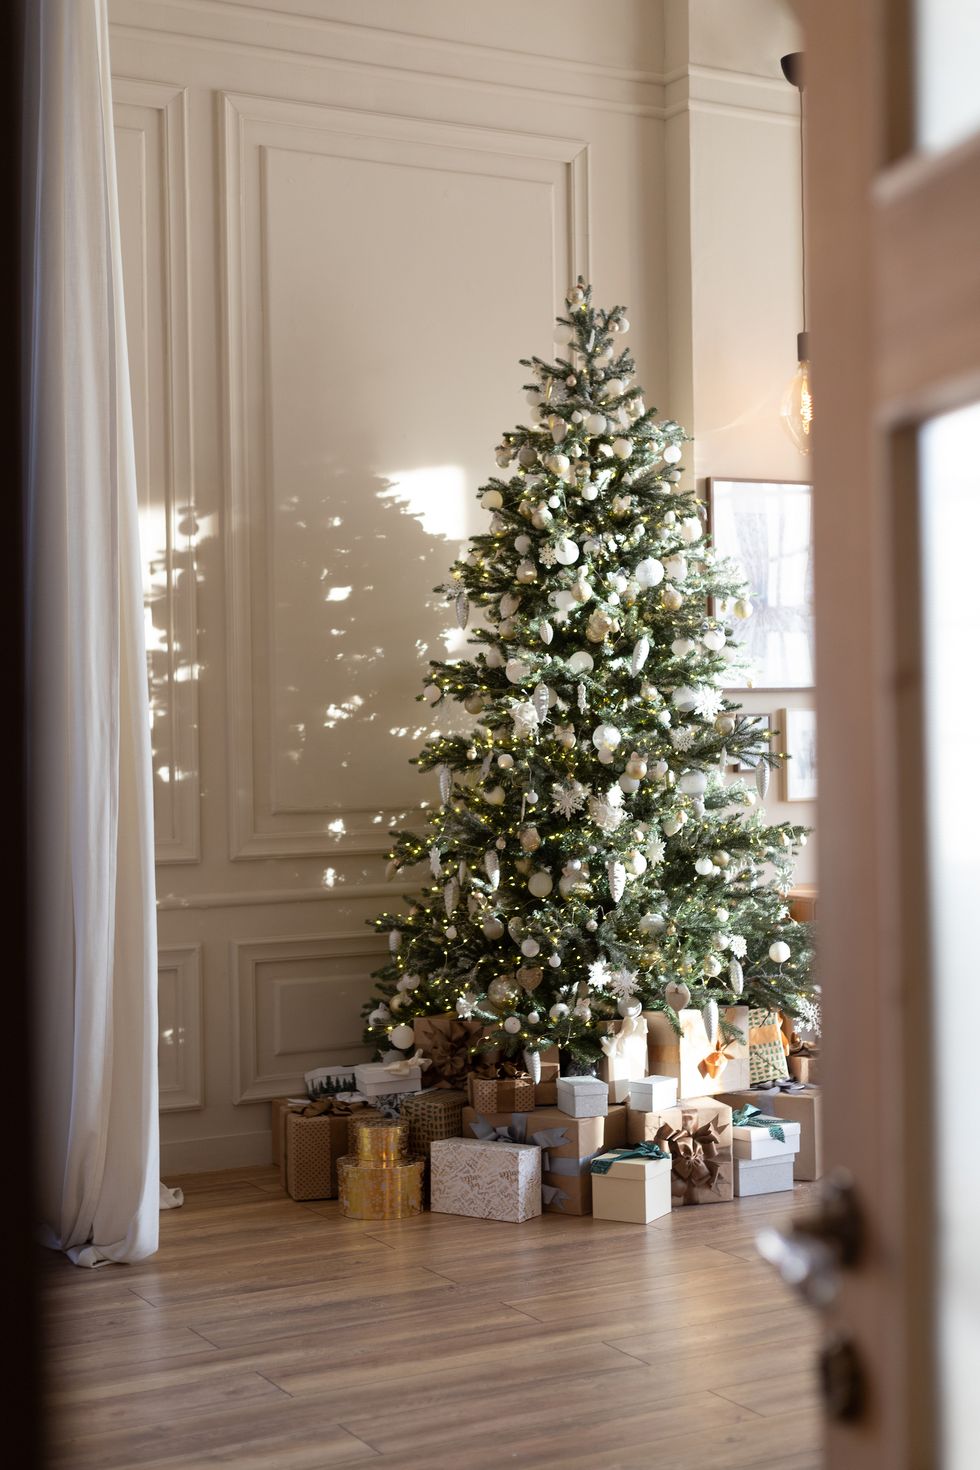 How To Stop Festive Décor Damaging Your Home